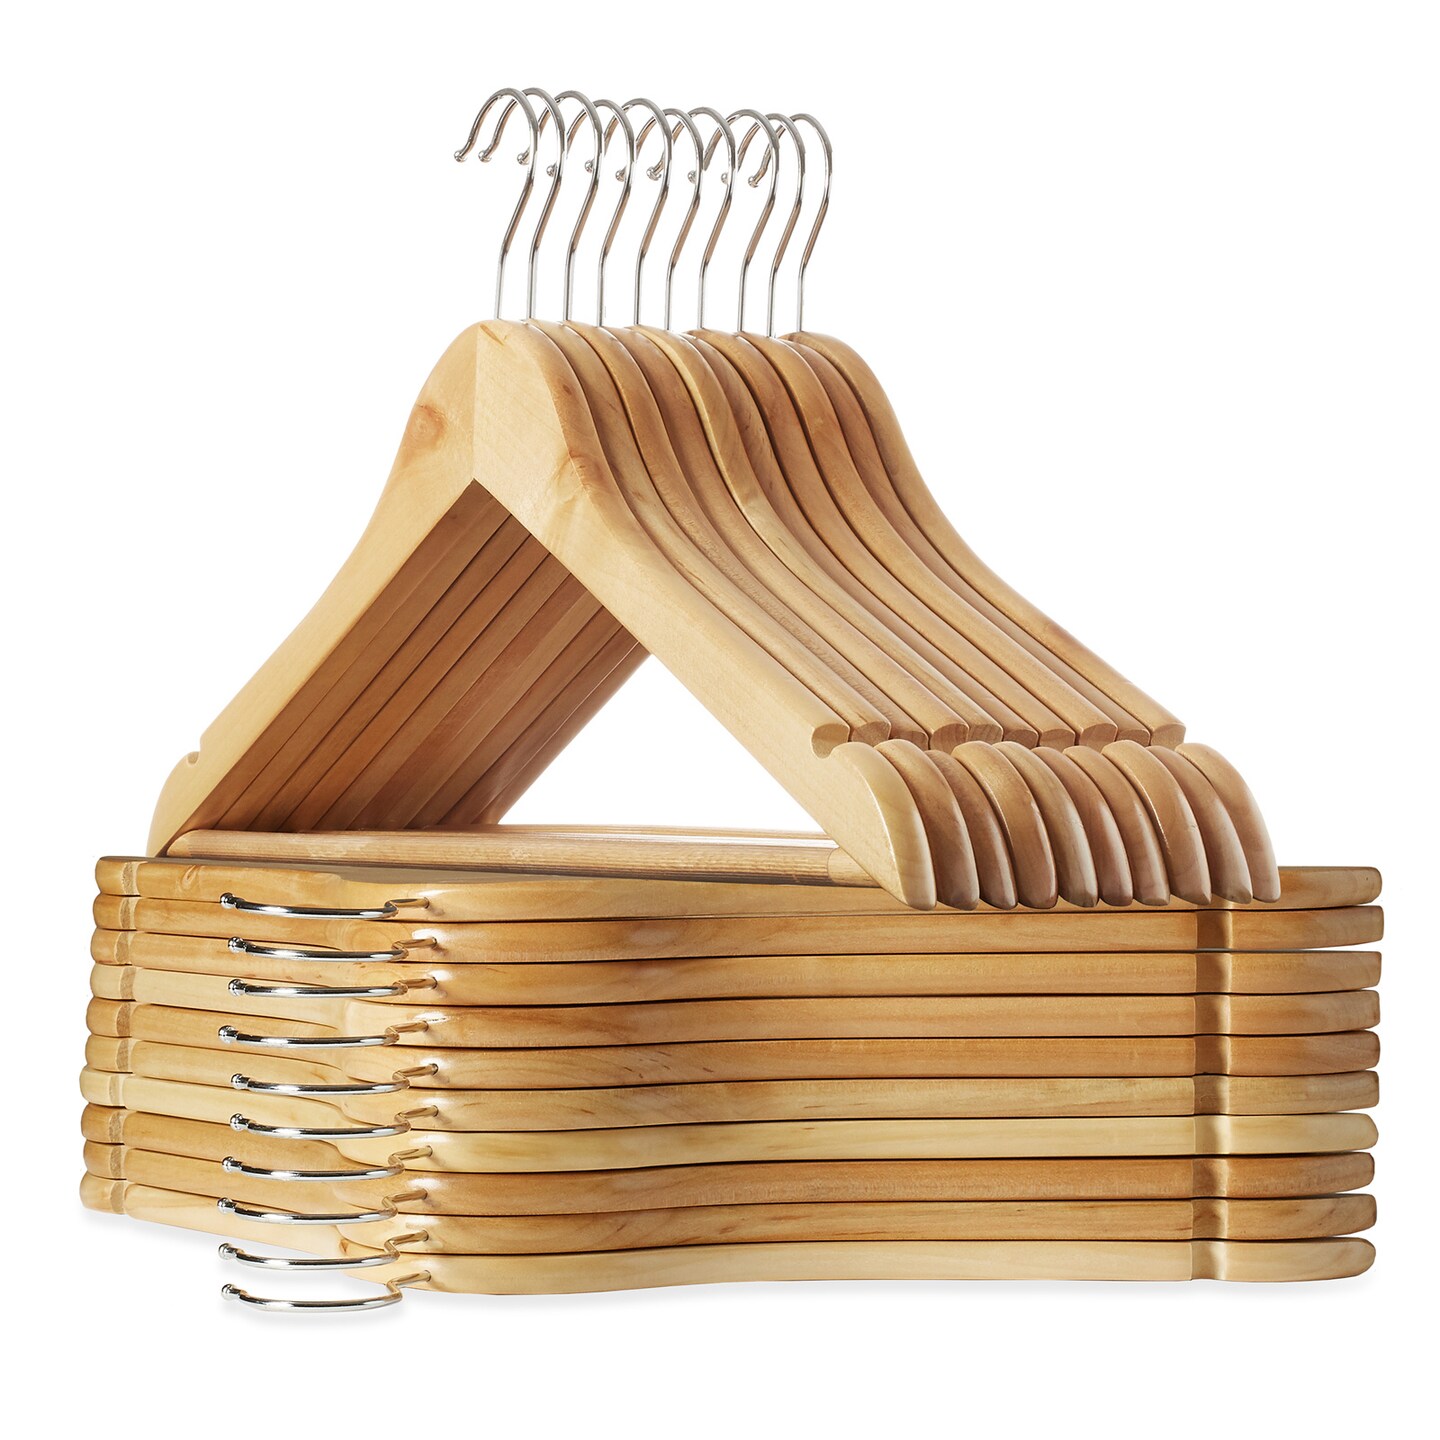 Casafield - 20 Wooden Suit Hangers - Premium Lotus Wood with Notches &  Chrome Swivel Hook for Dress Clothes, Coats, Jackets, Pants, Shirts, Skirts